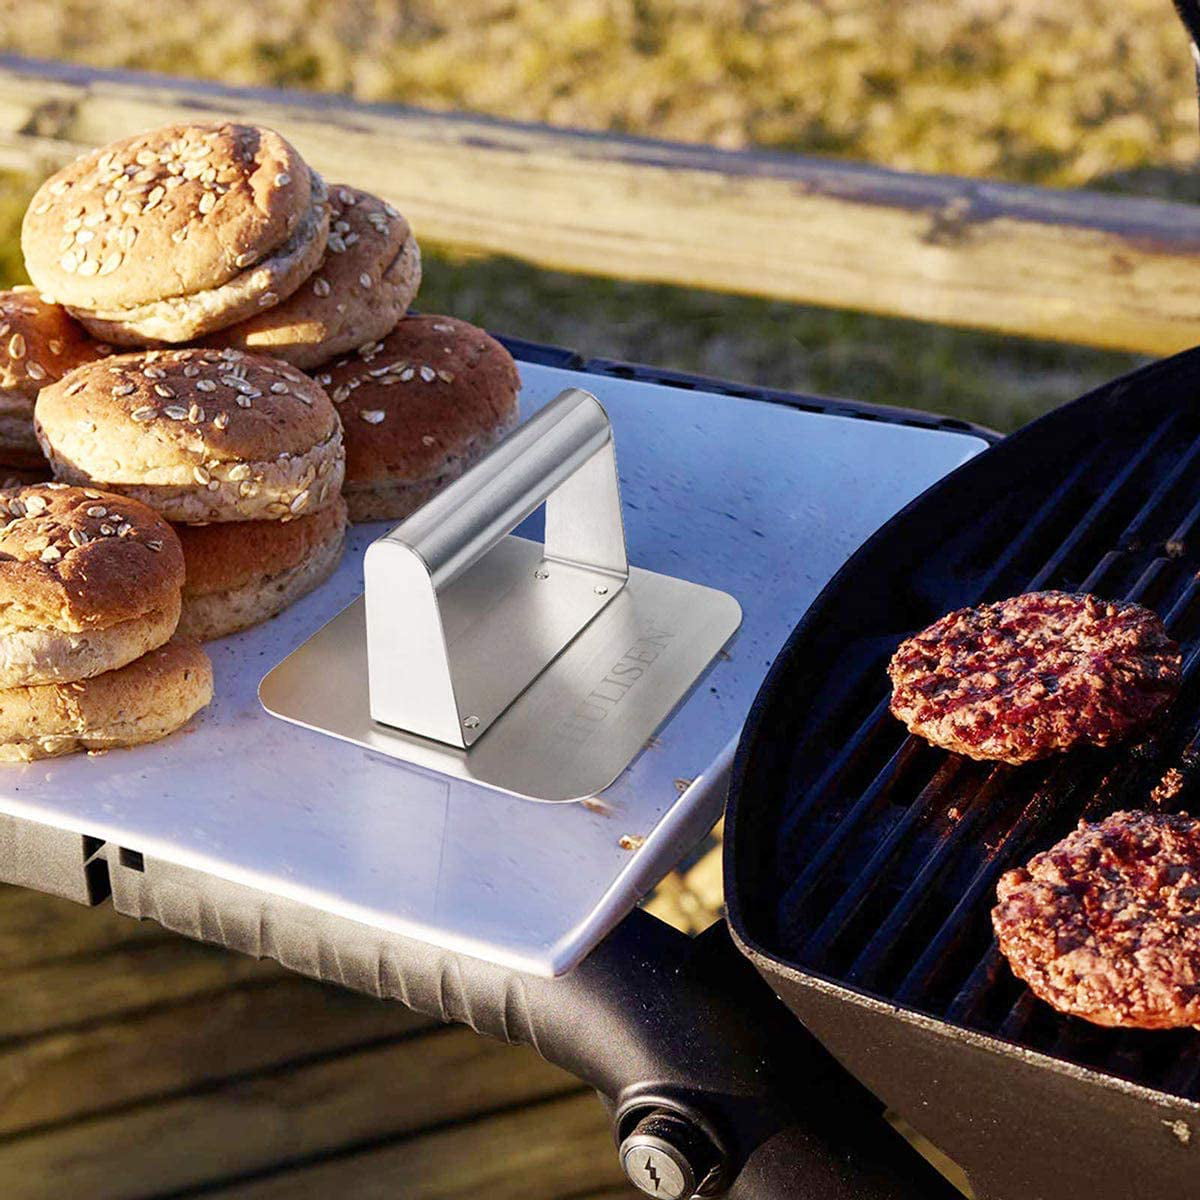 Square Paninis Stainless Steel Burger Press Perfect for Steak Hamburger Press Patty Maker and Squeeze Grease Flat Top Griddle Grill Cooking Non-Stick Bacon Grill Press Burger Smasher 